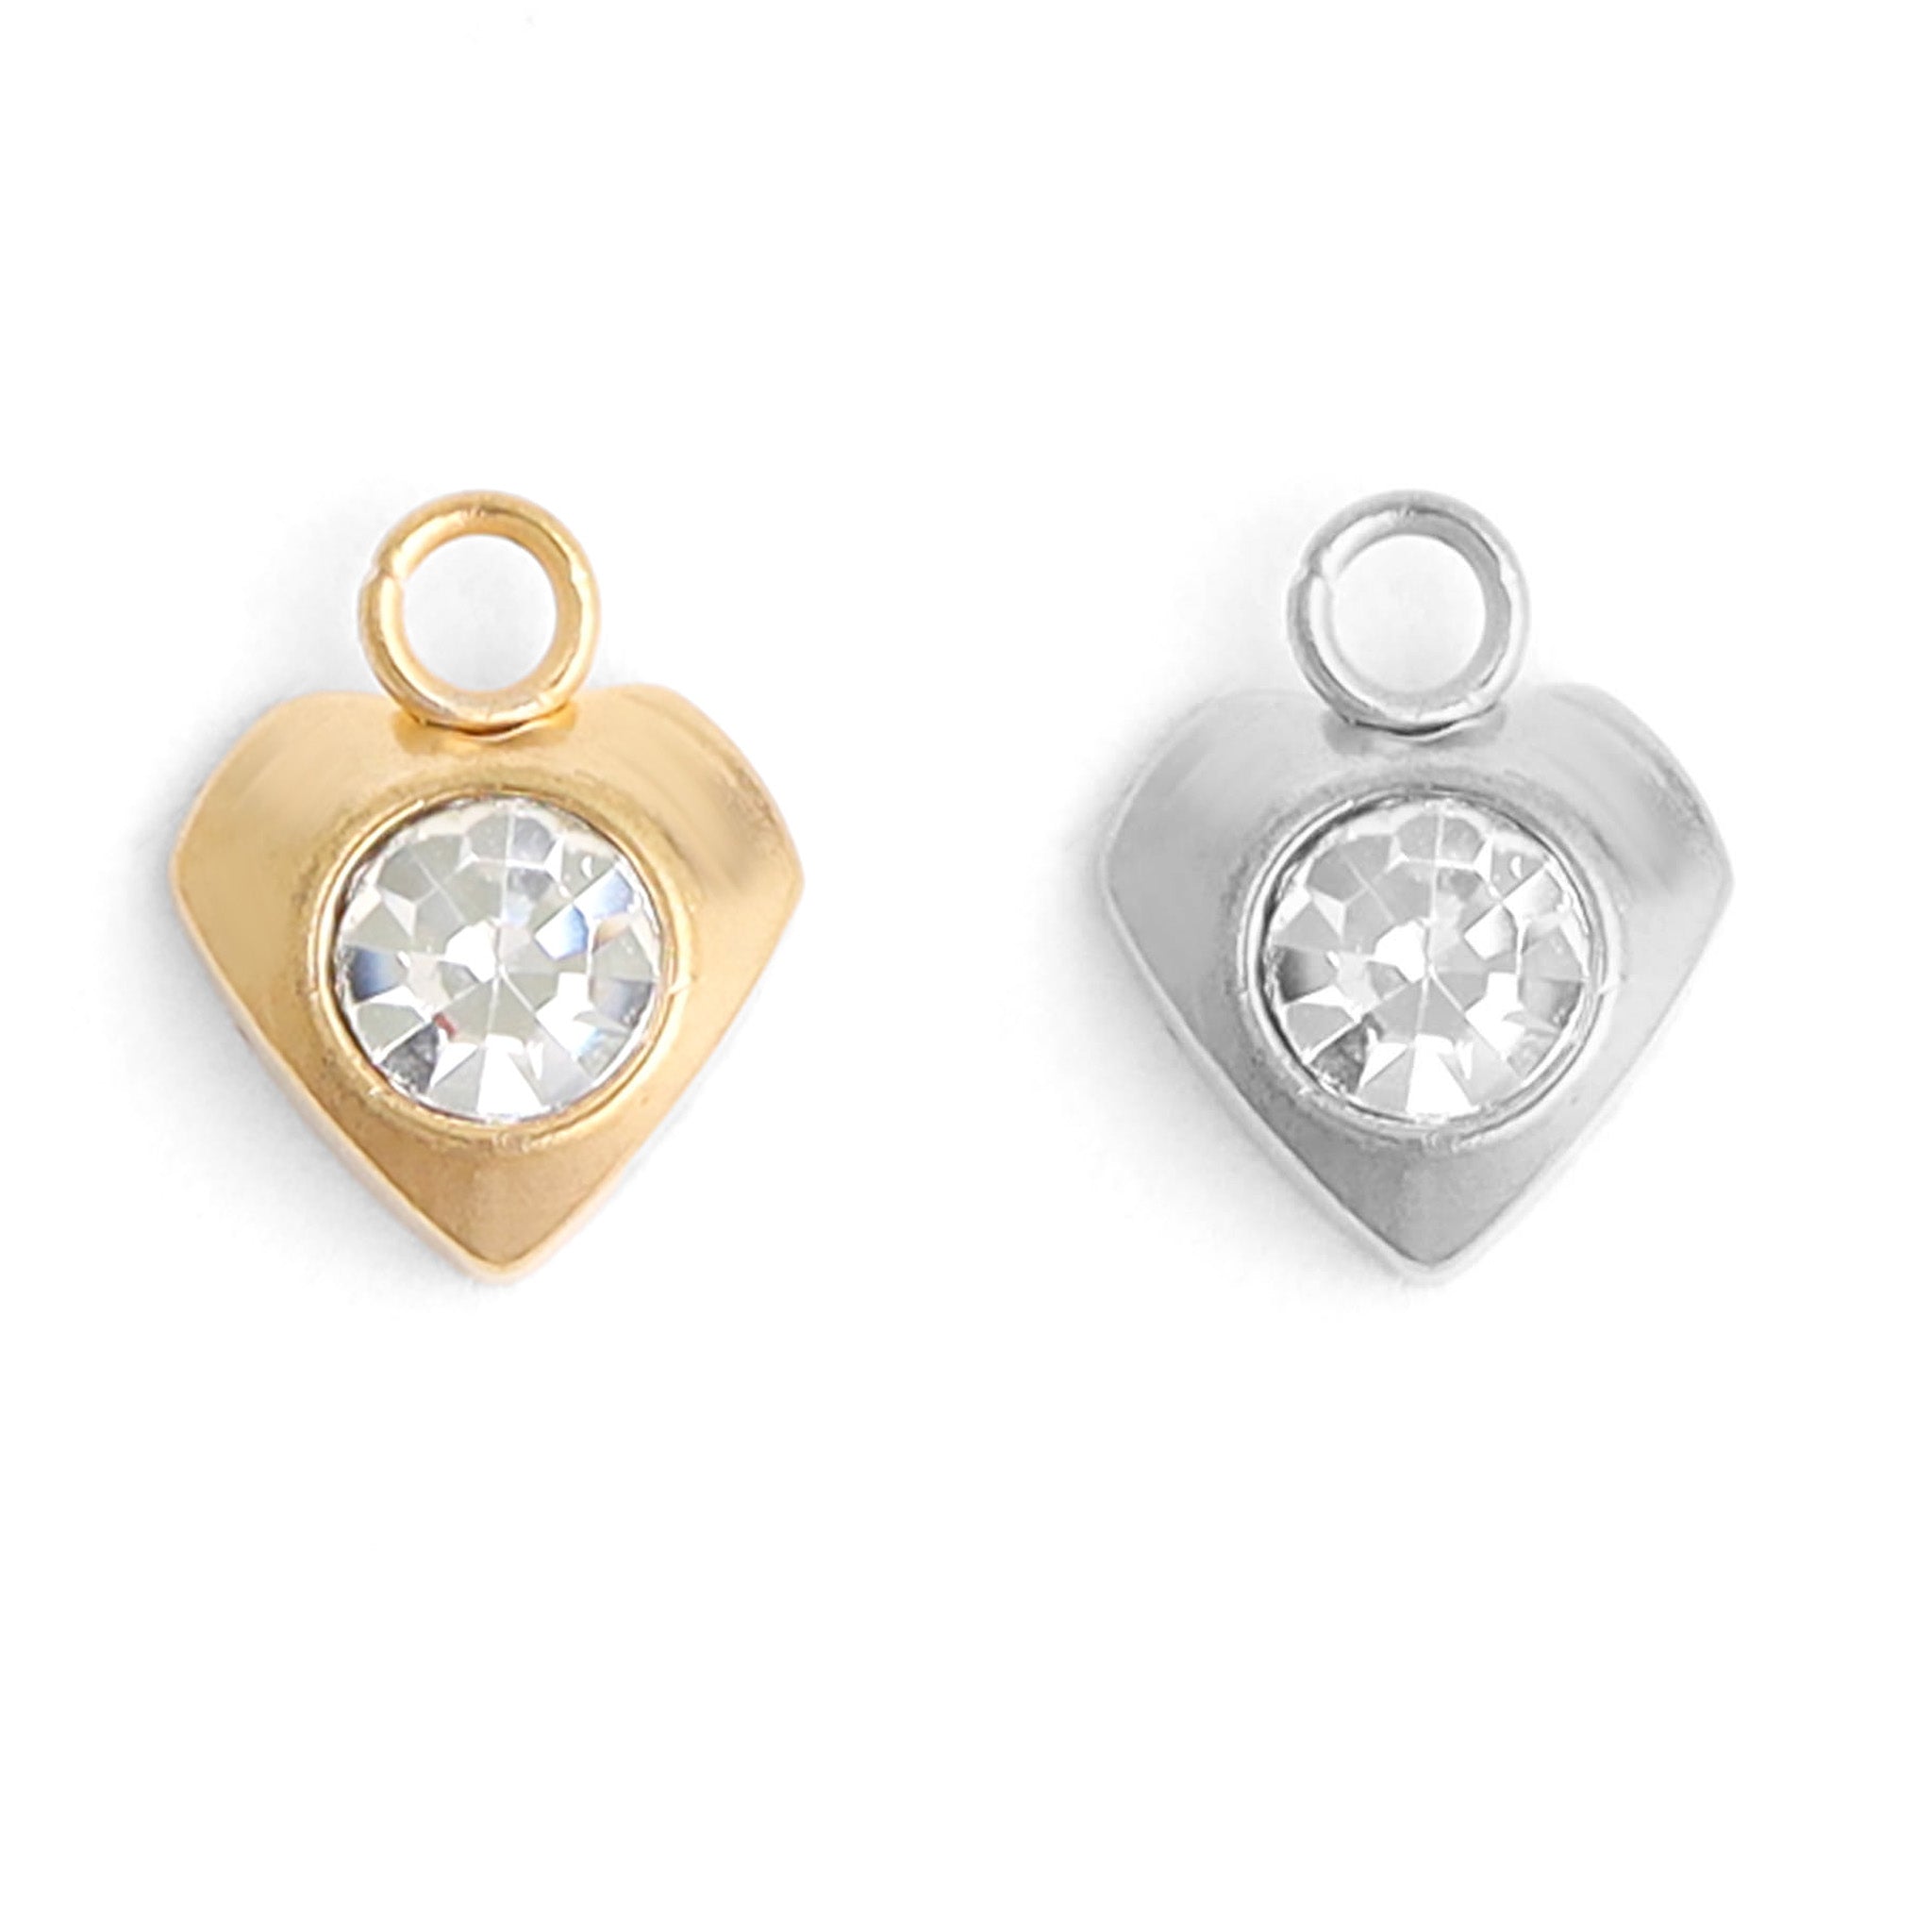 18K Gold PVD Stainless Steel Heart With Cubic Zirconia Charm / PDL0111